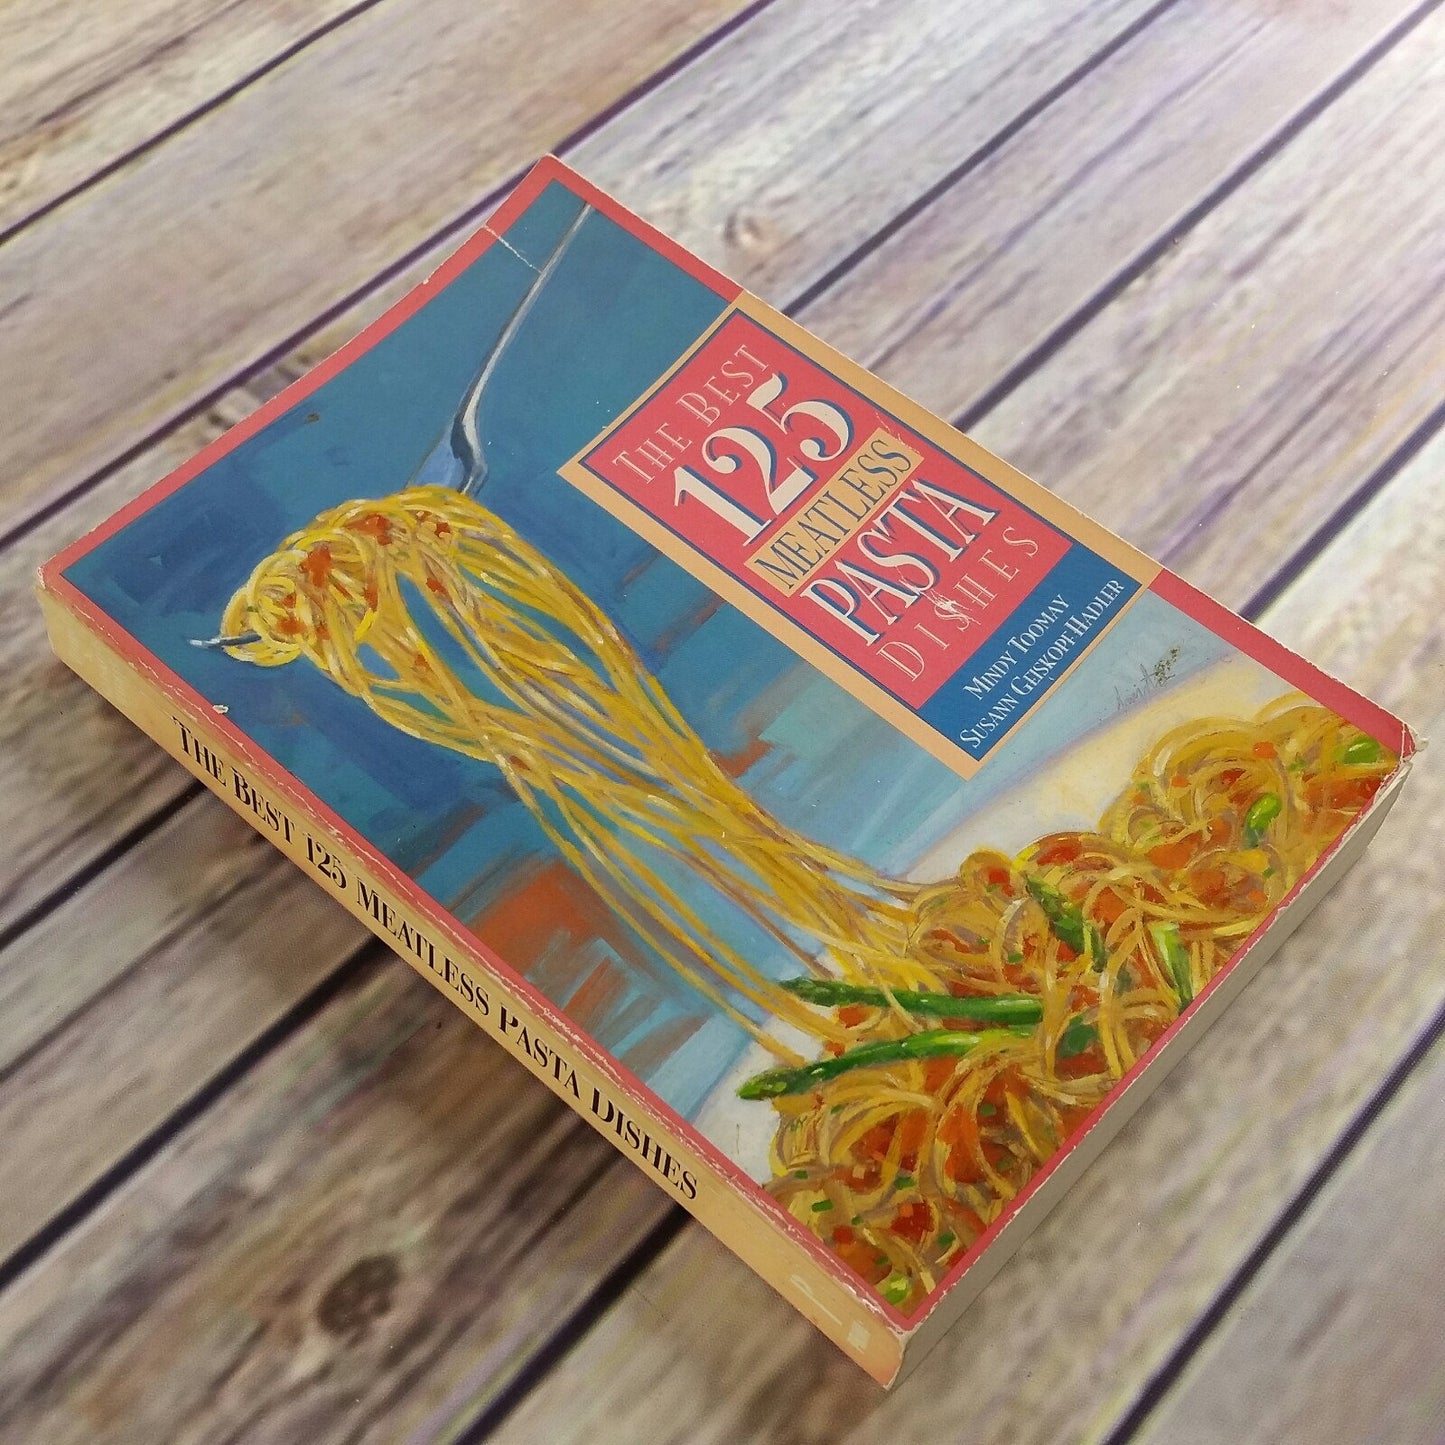 Vintage Cookbook The Best 125 Meatless Pasta Dishes 1992 Paperback Book Mindy Toomay and Susann Hadler